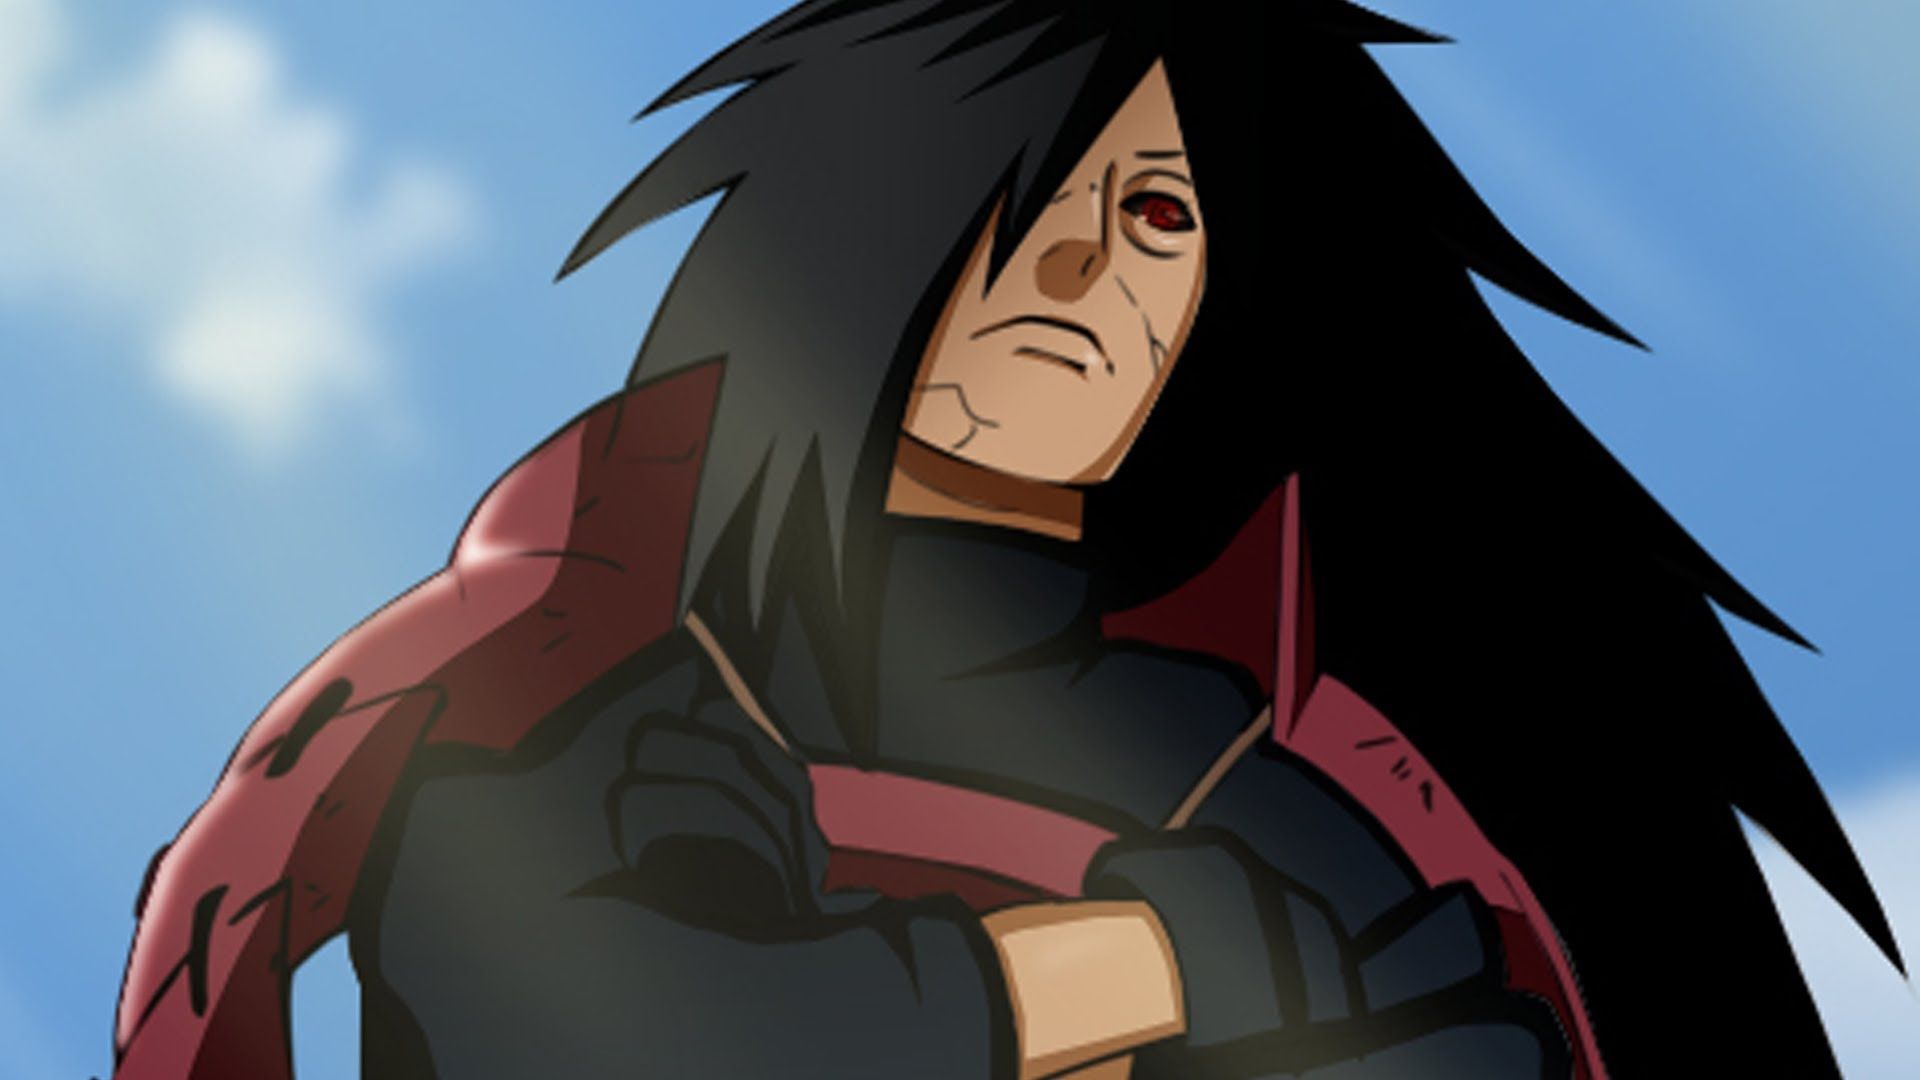 Free download Uchiha Madara Wallpaper High Quality Download [1920x1080] for your Desktop, Mobile & Tablet. Explore Madara Uchiha Wallpaper. Uchiha Wallpaper, Uchiha Clan Wallpaper, Sasuke Uchiha Wallpaper HD